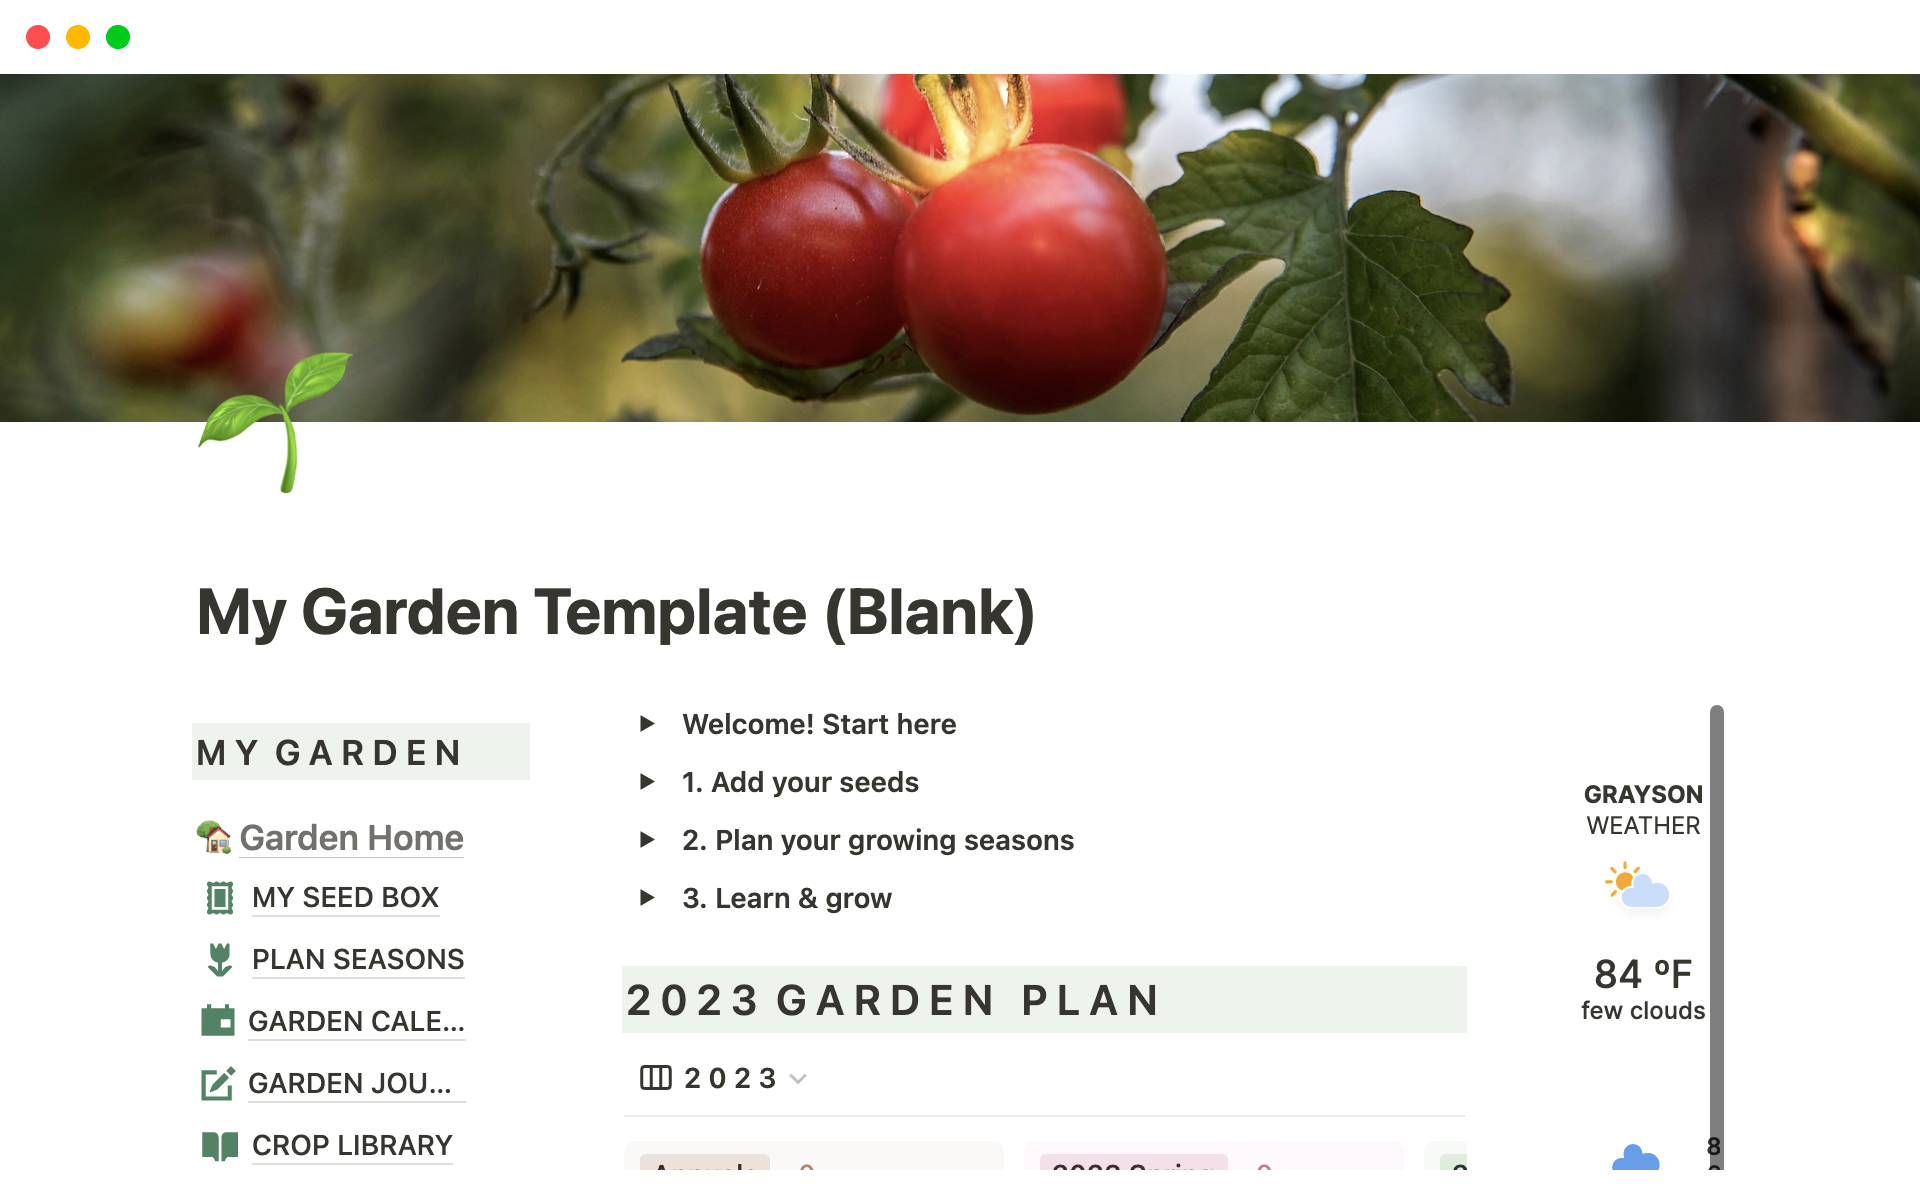 Plan your vegetable garden seasons, crops, tasks, seed packets, bed rotation & companion plants!